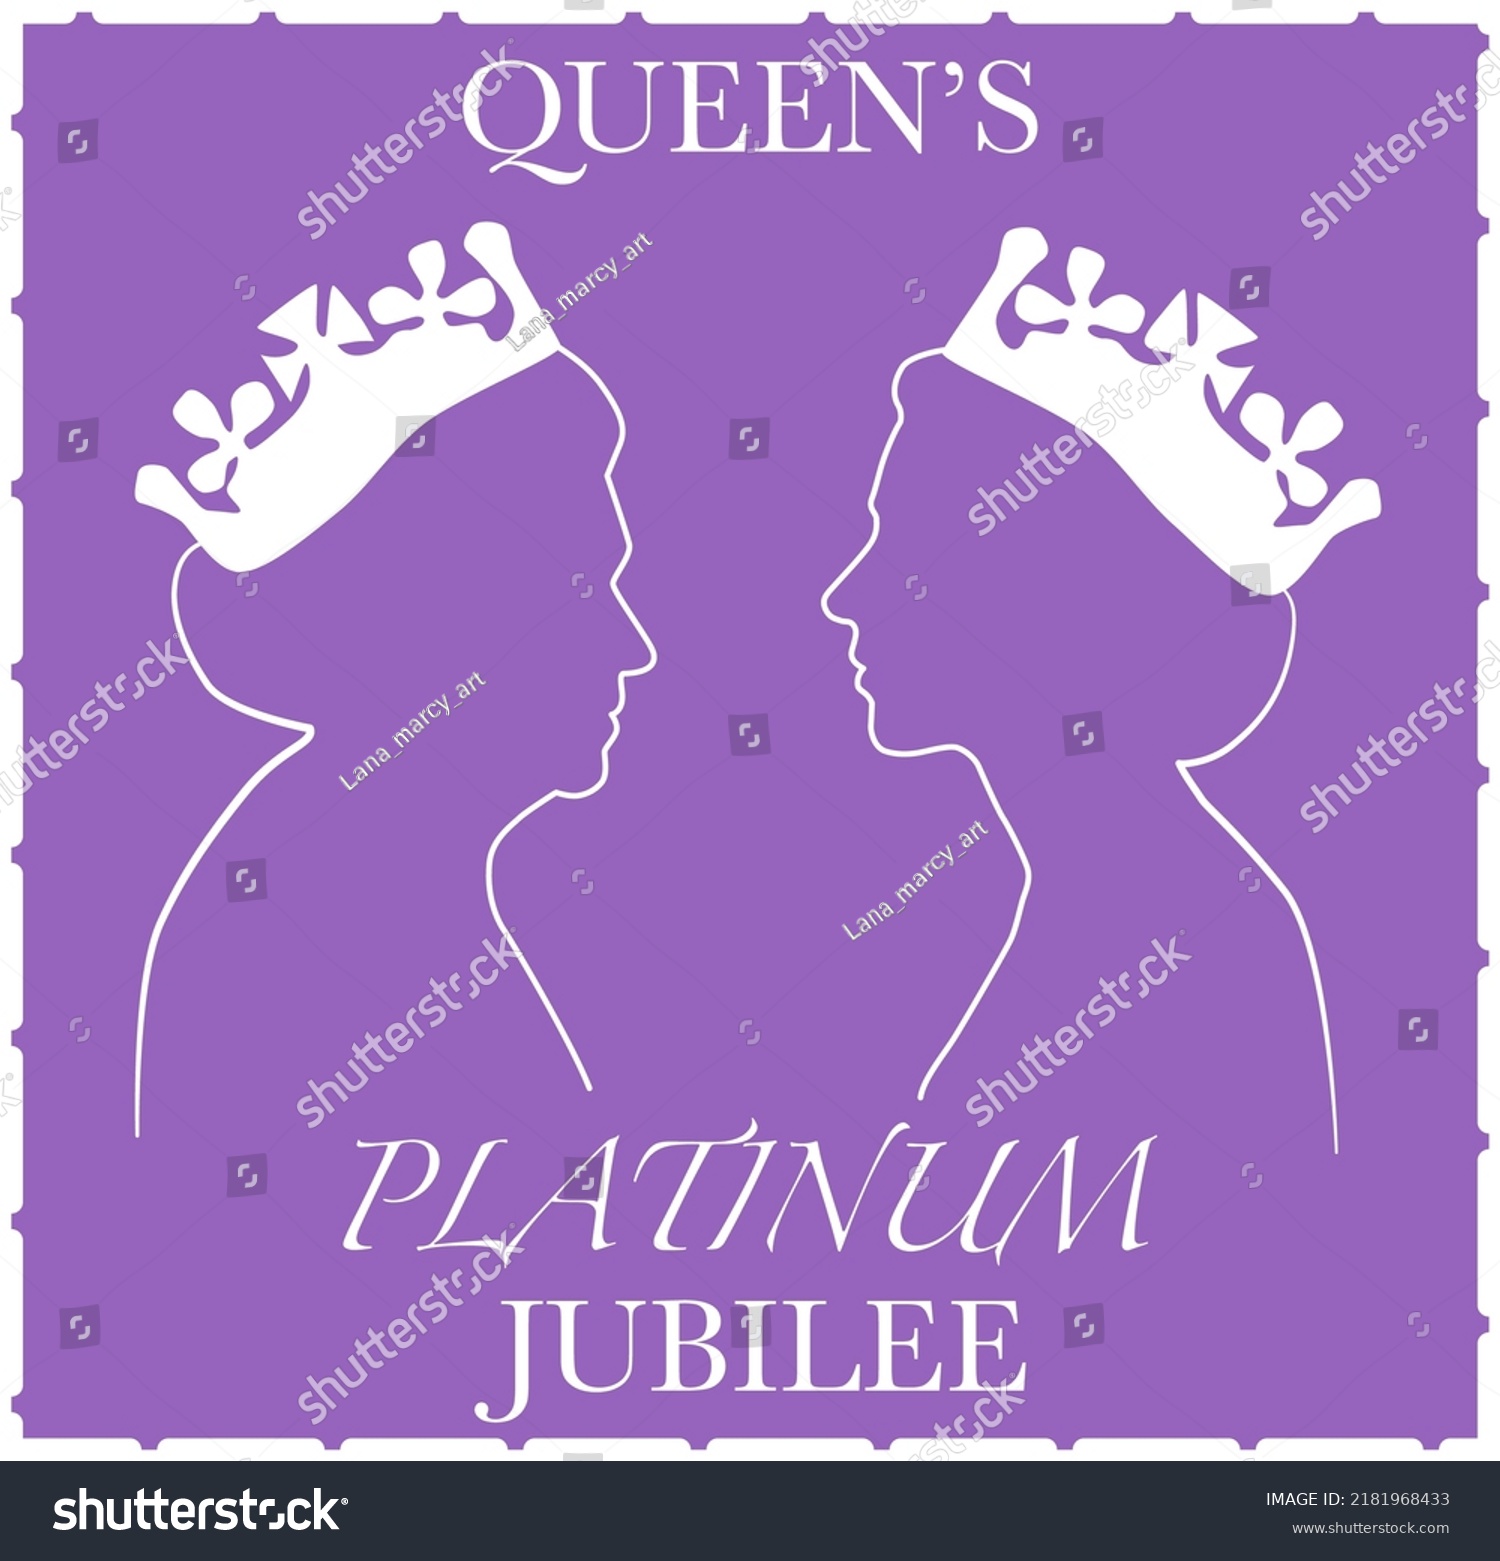 SVG of The Queen’s platinum jubilee poster. Side profiles of Queen Elizabeth. 70 years of service celebration.  svg